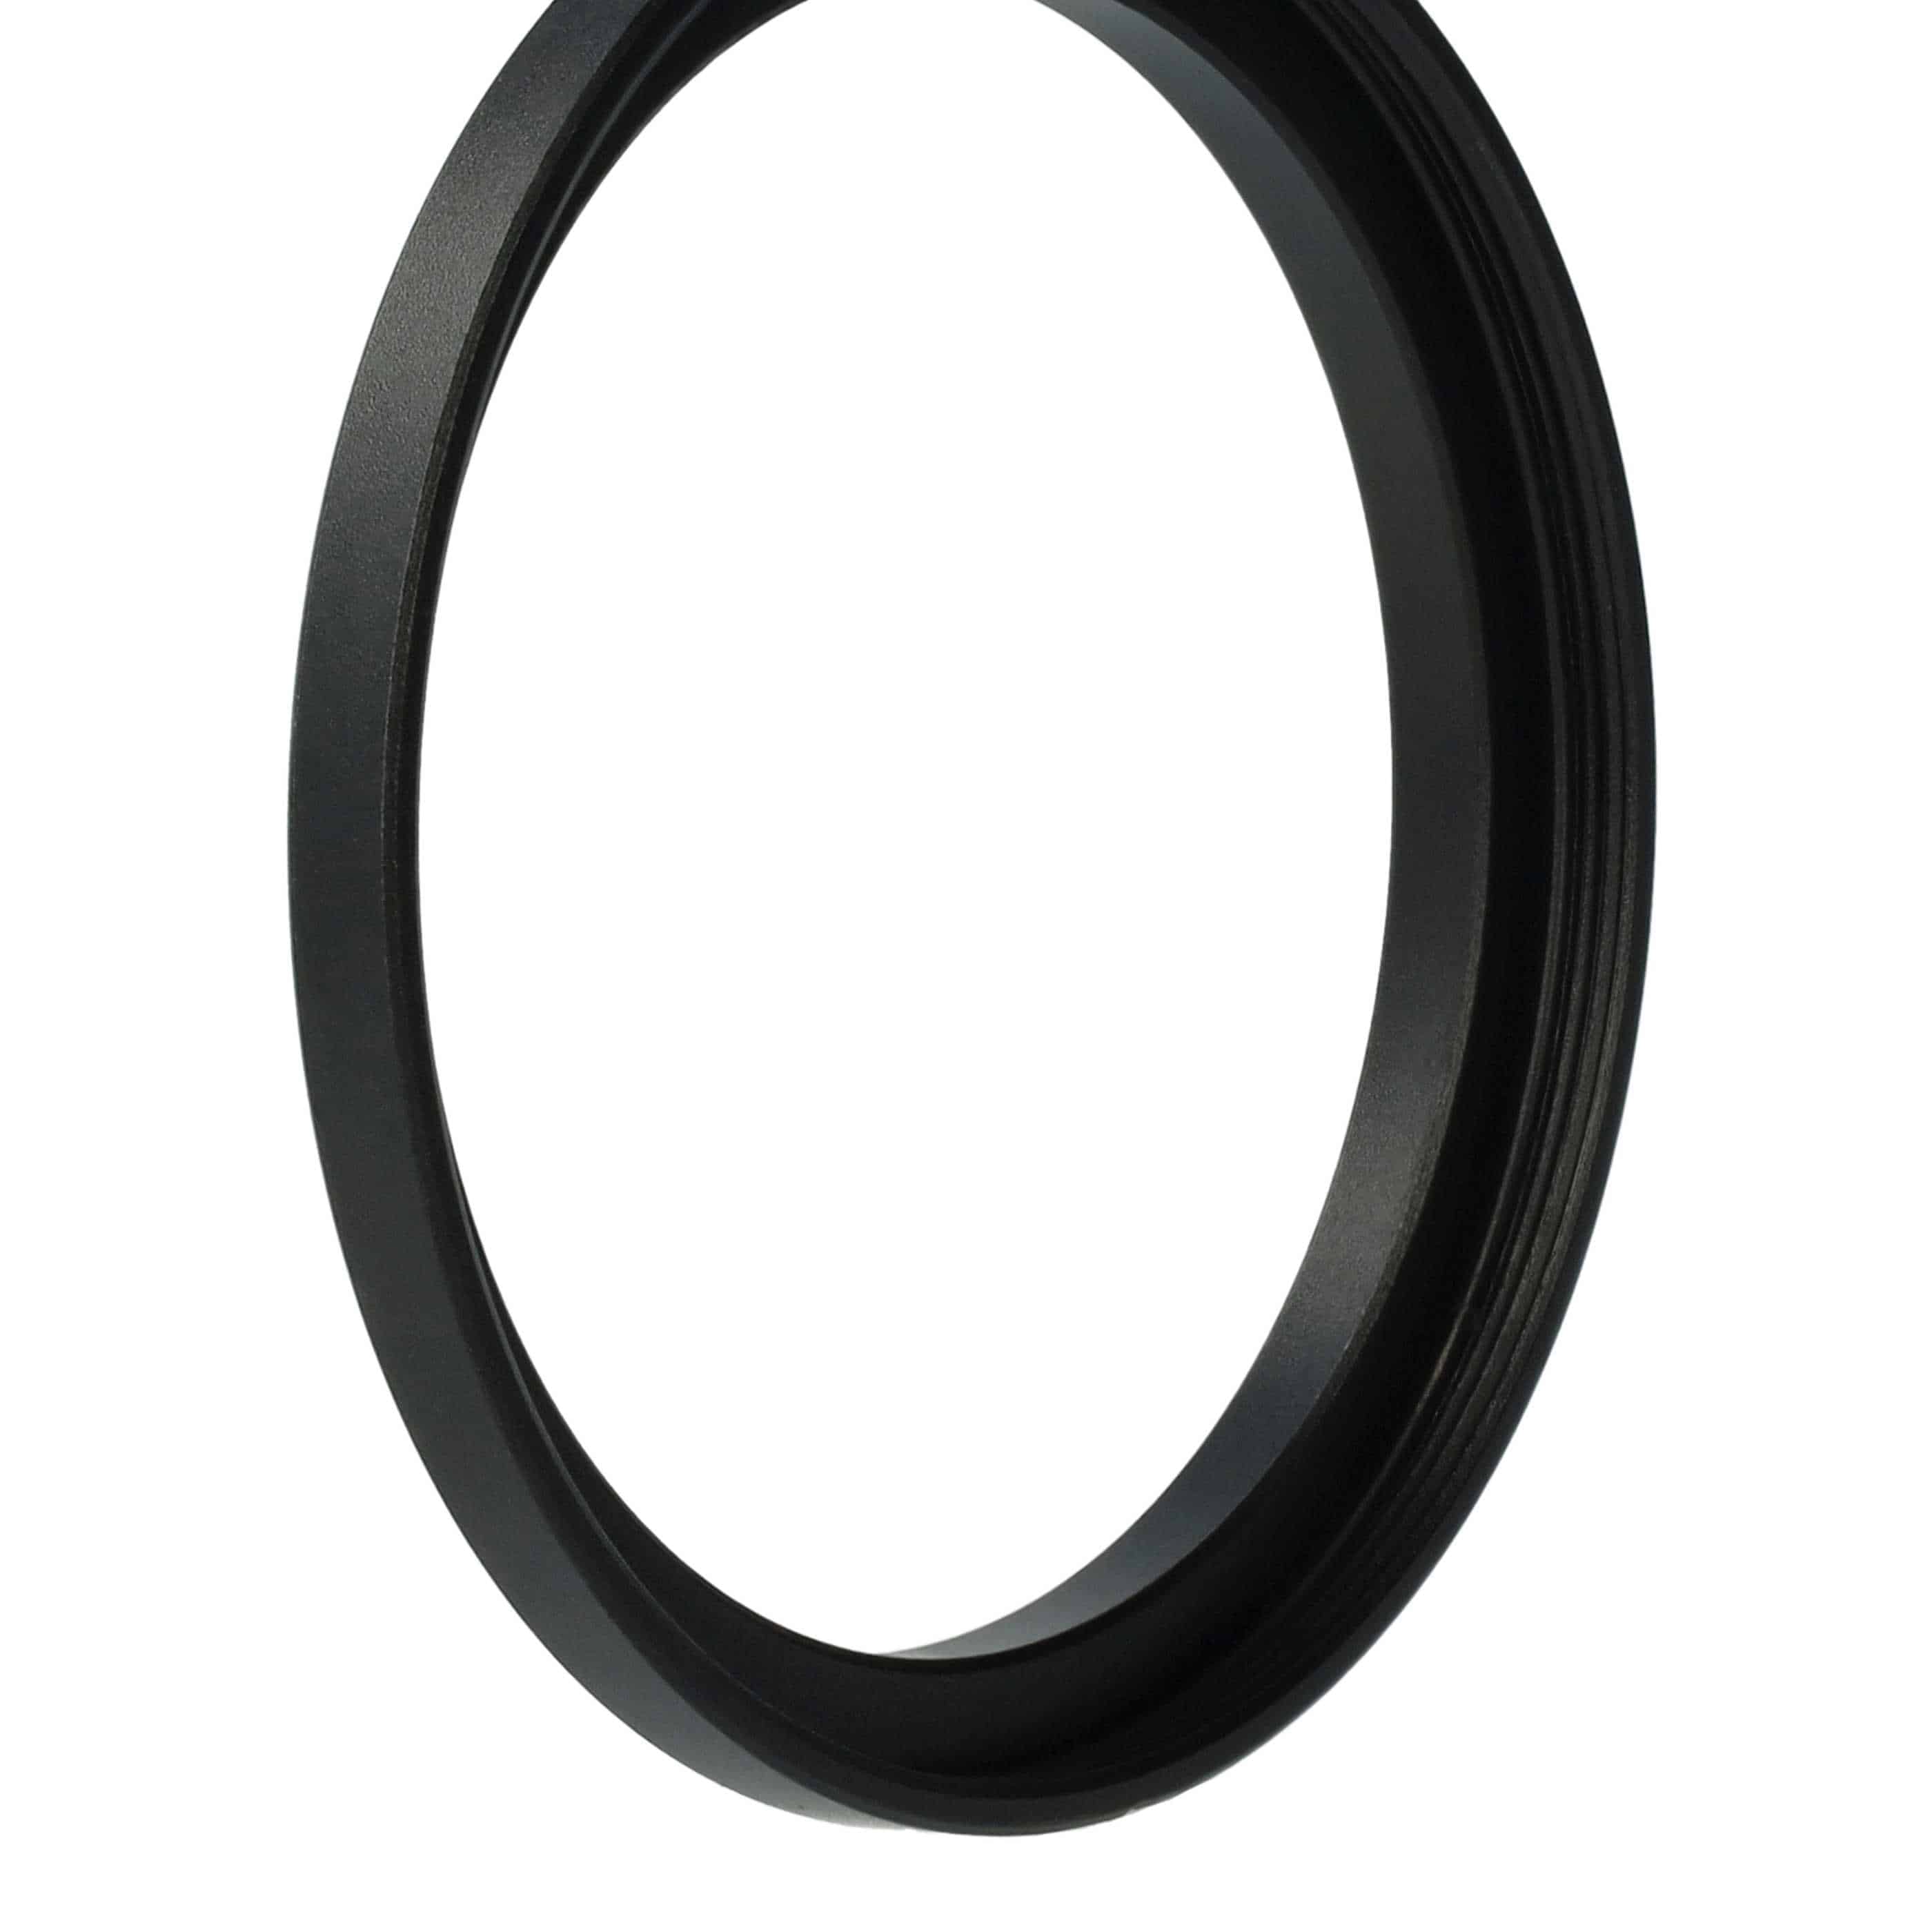 Step-Up Ring Adapter of 48 mm to 52 mmfor various Camera Lens - Filter Adapter